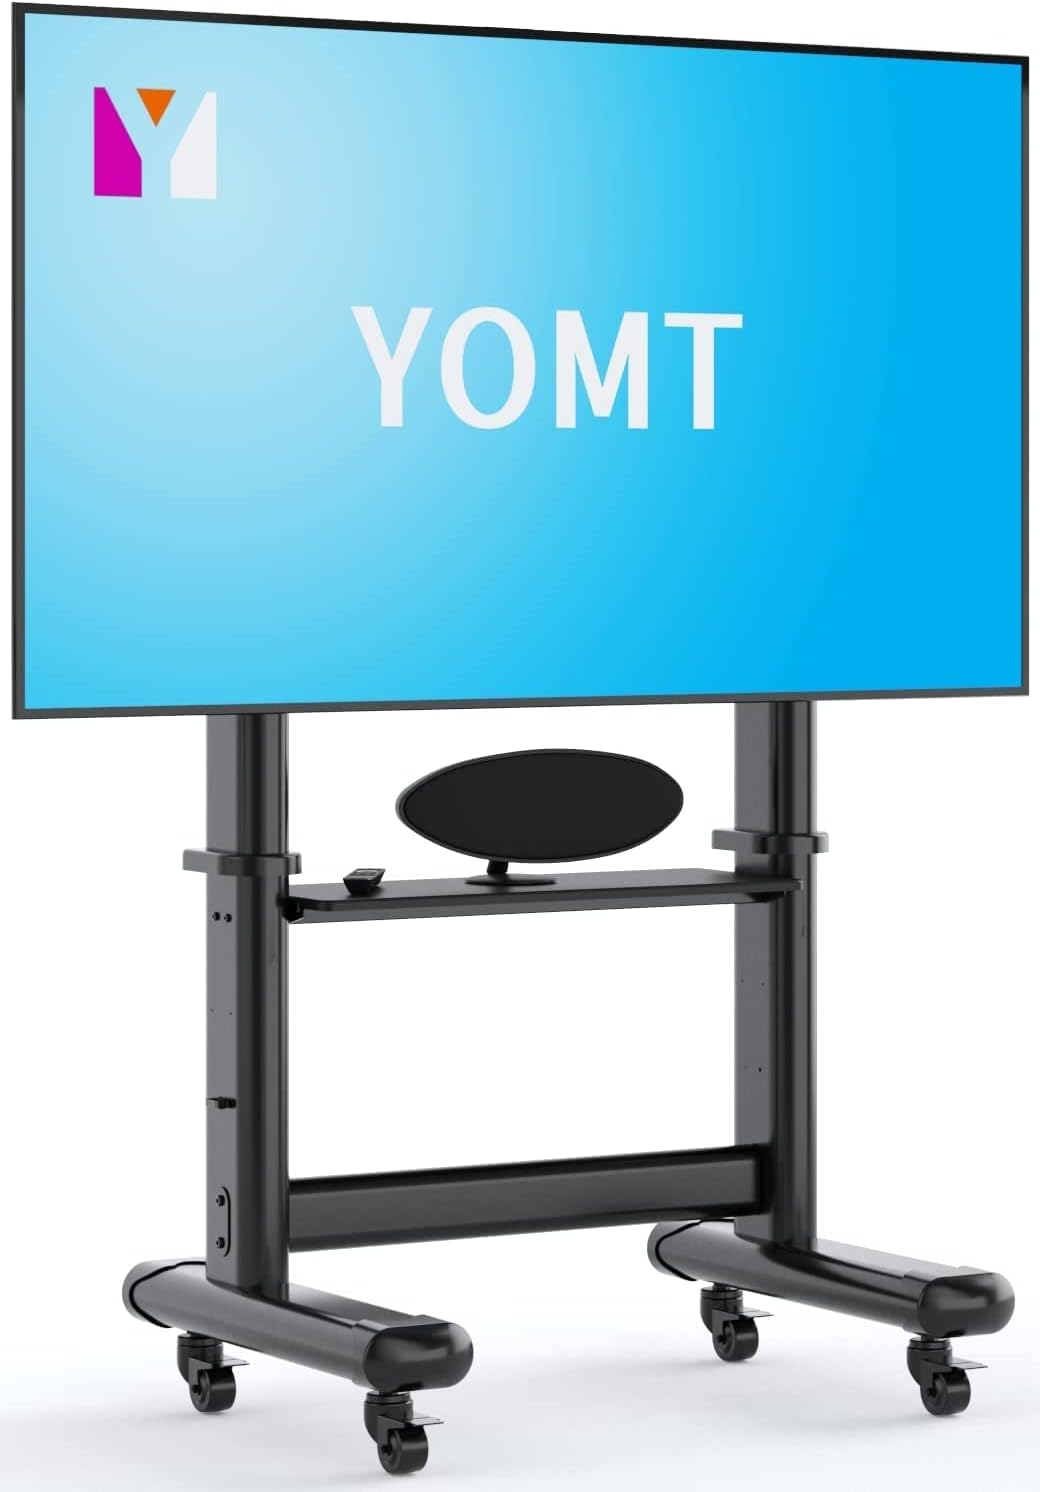 Mobile TV Cart for 55 to 100 Inch LCD LED OLED Flat Panel Plasma TV Rolling TV Stand with Height Adjustable Shelf Max VESA 600x800mm up to 220lbs -Heavy Duty TV Stand with Wheels Black